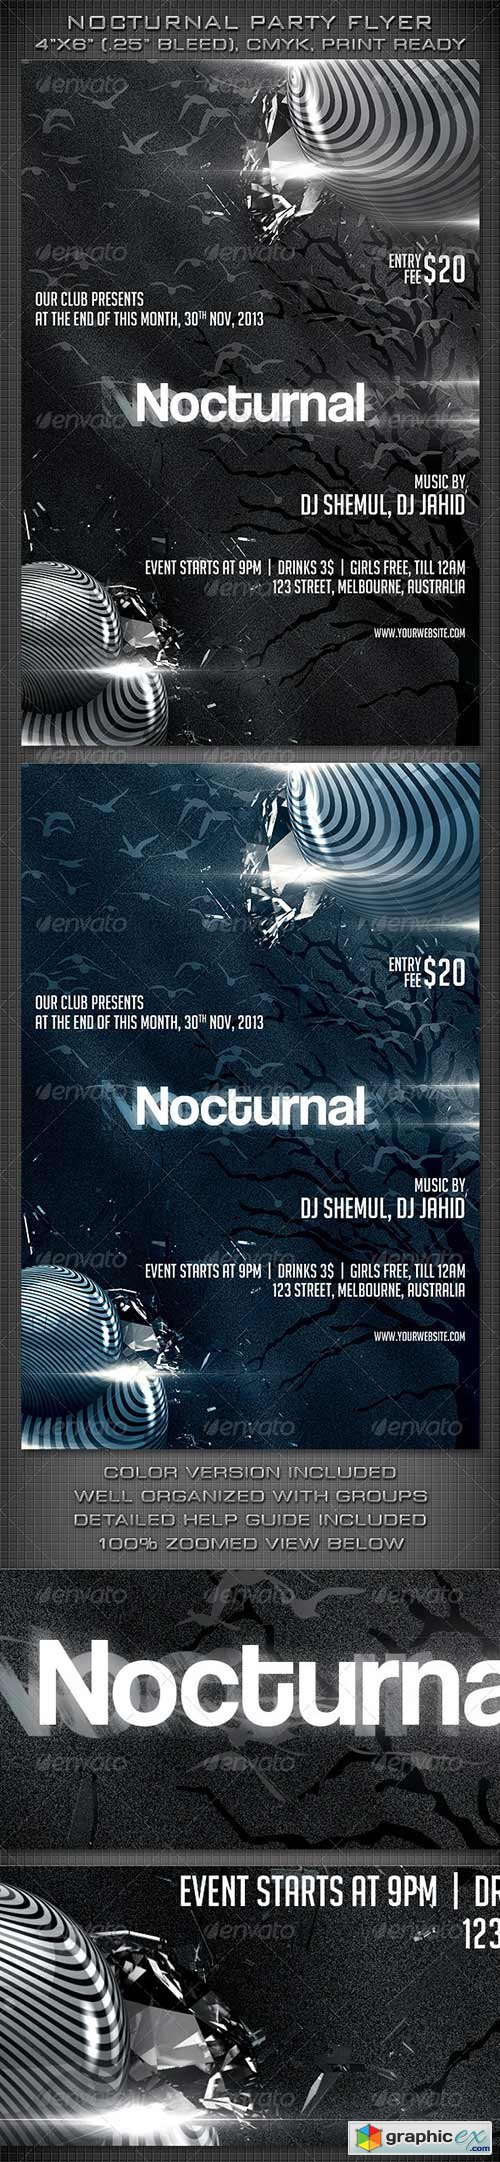 Nocturnal Party Flyer